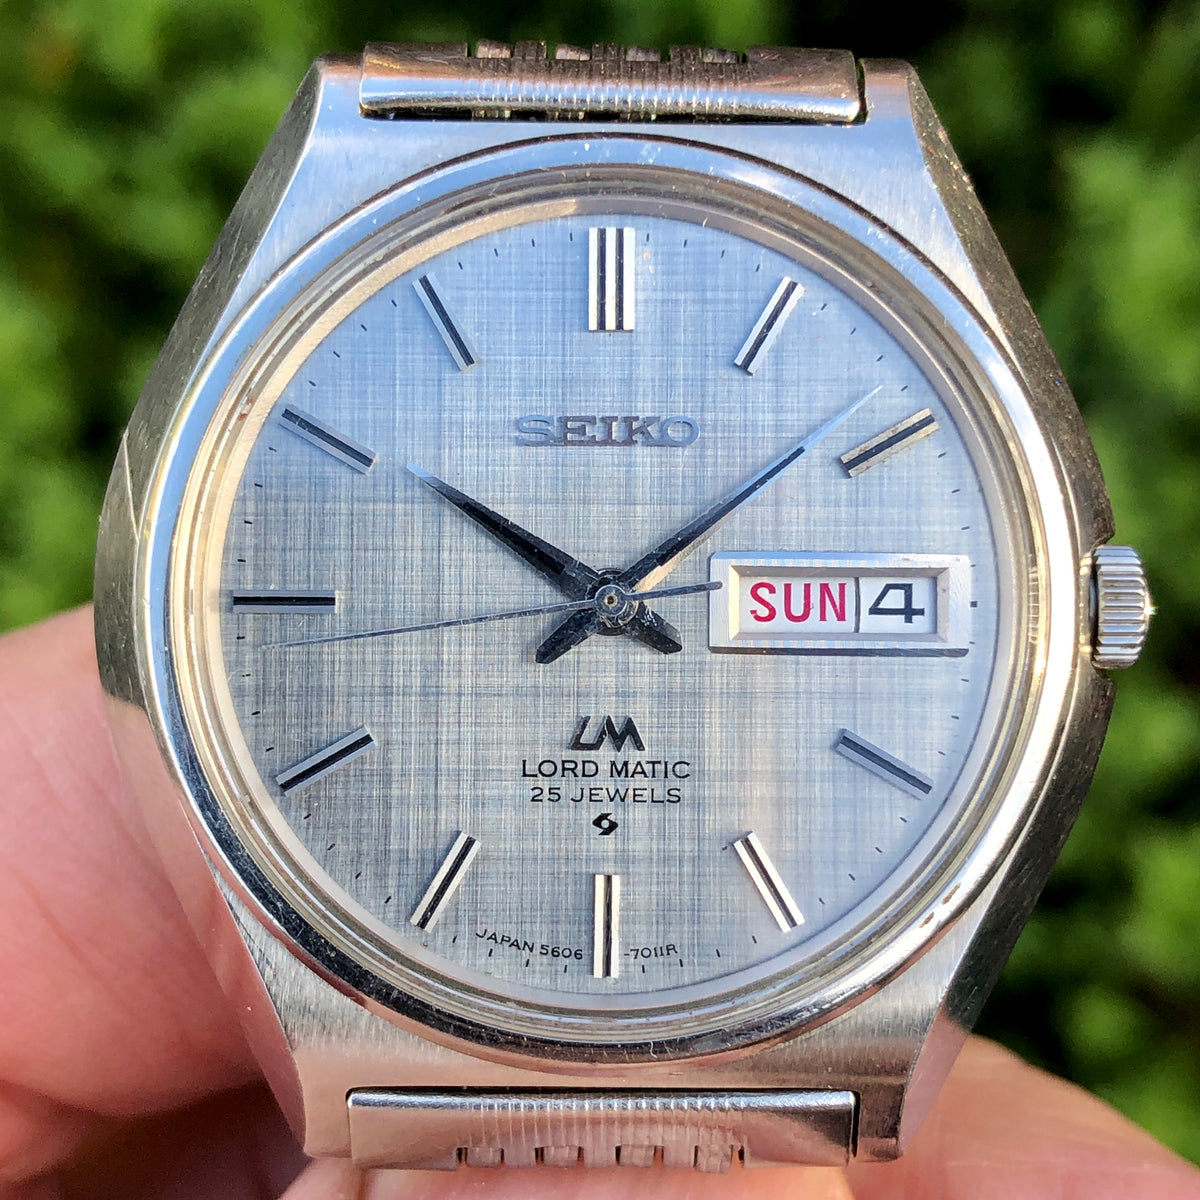 Lord Matic 5606-7010 Weekdater from August 1970 – classicseiko